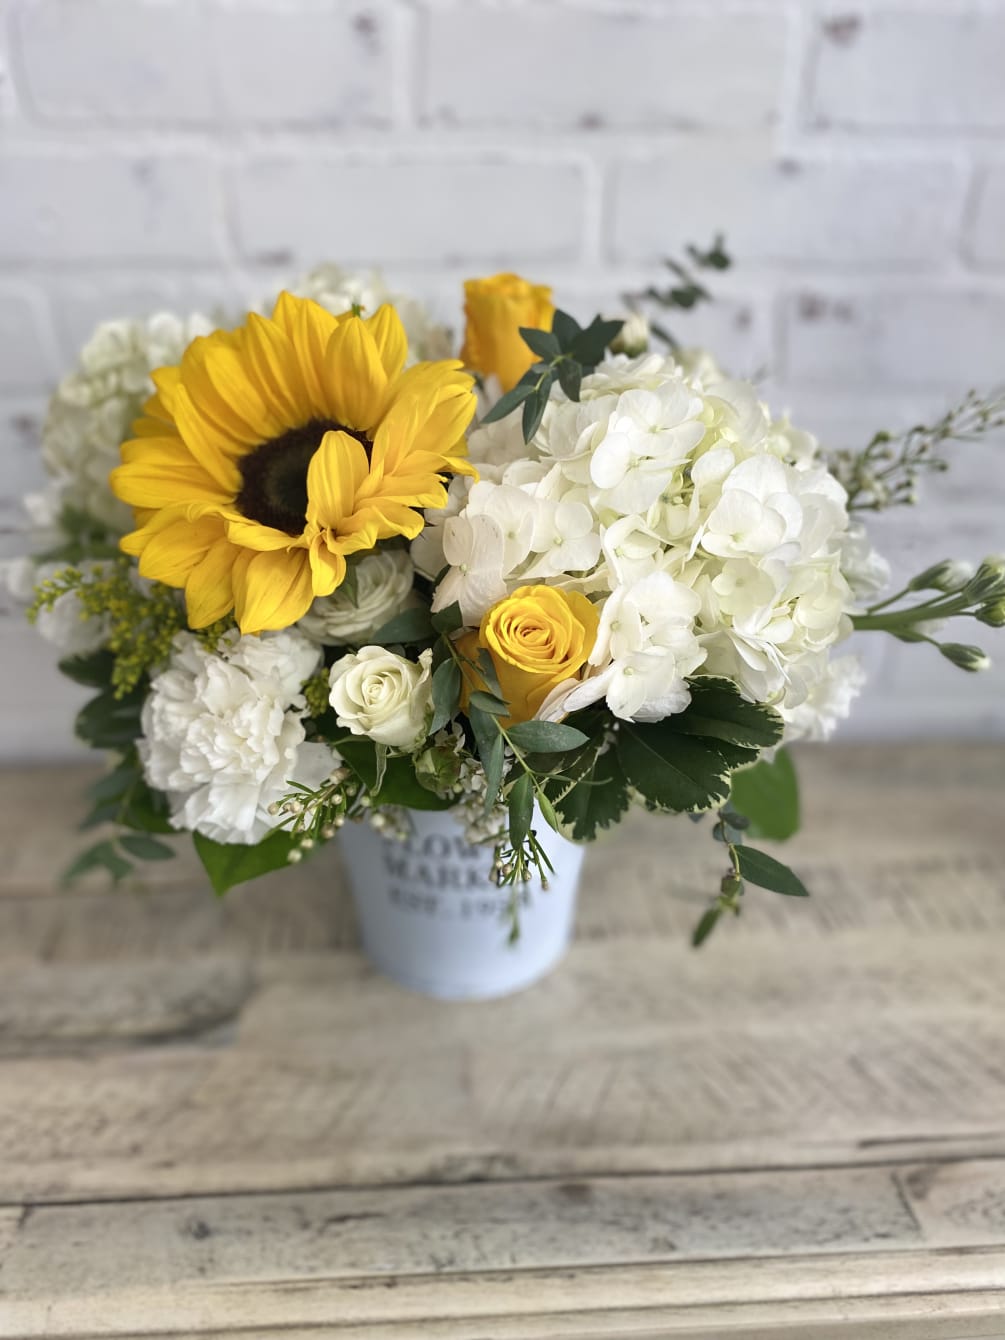 Yellow and white blooms arranged delicately in a flower market container